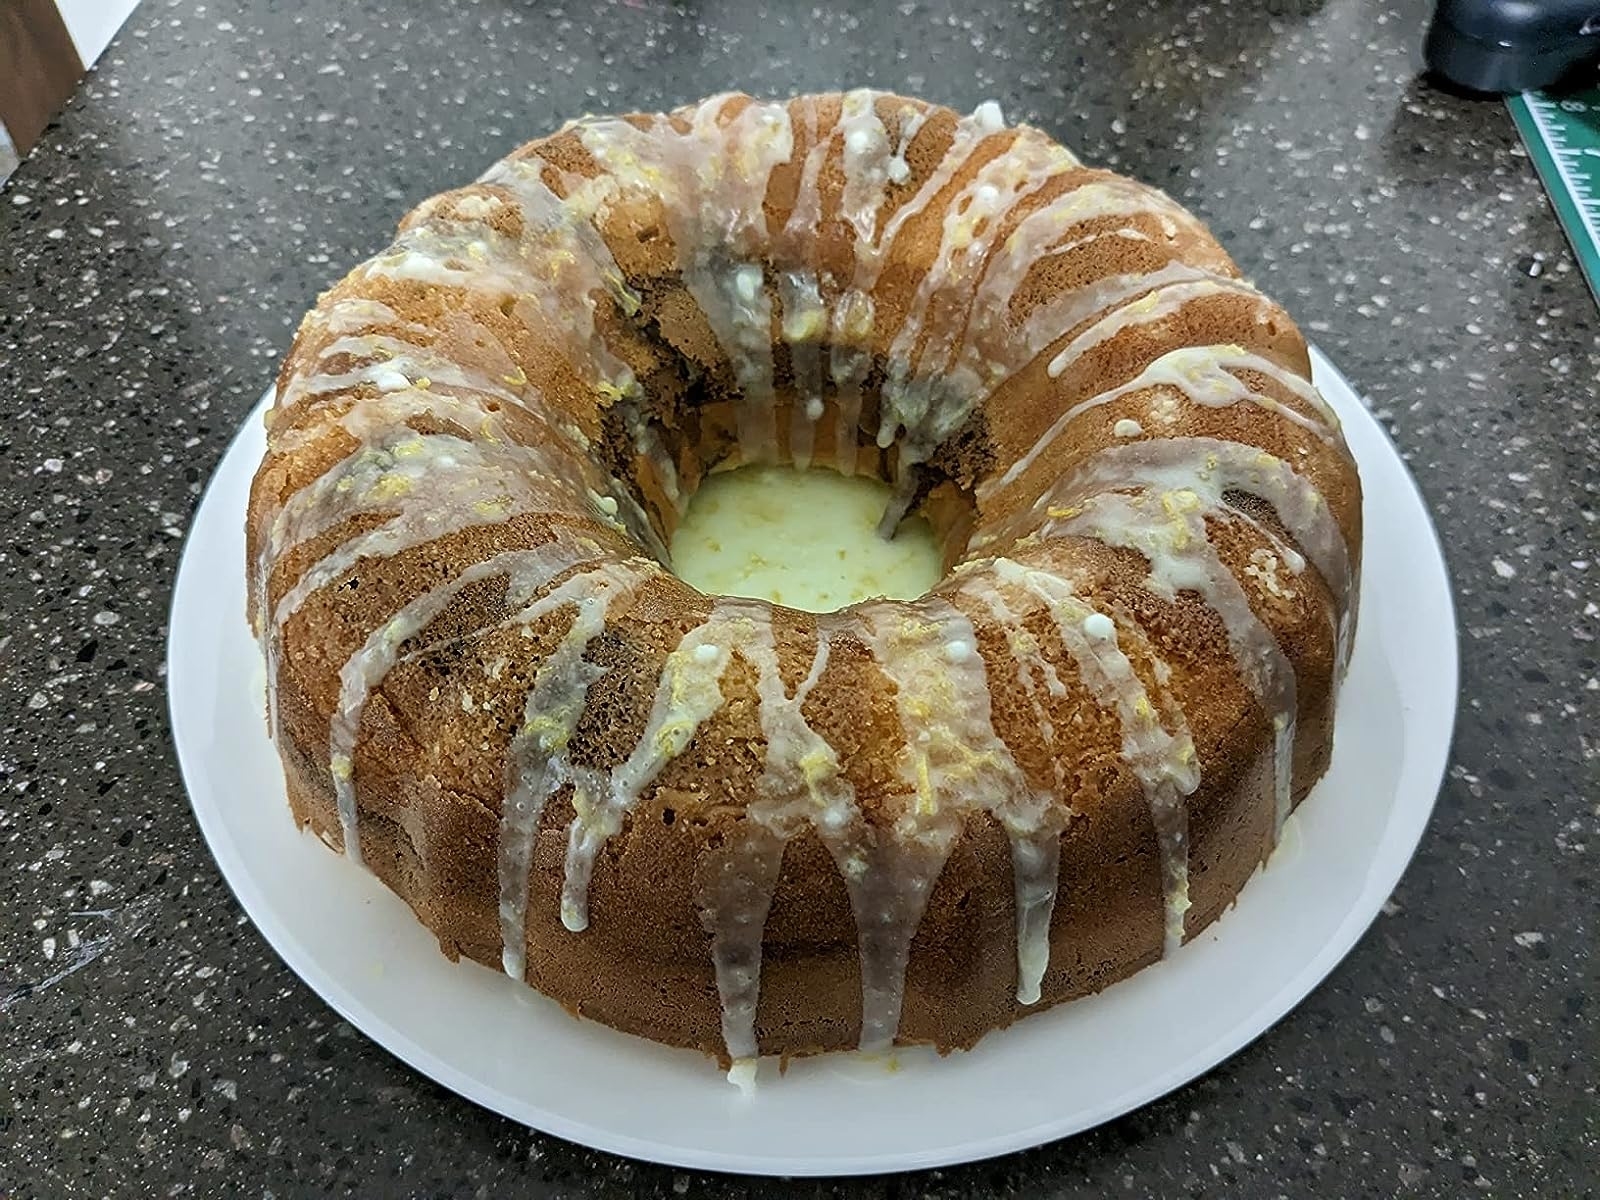 Reviewer image of their baked bundt cake with icing on it